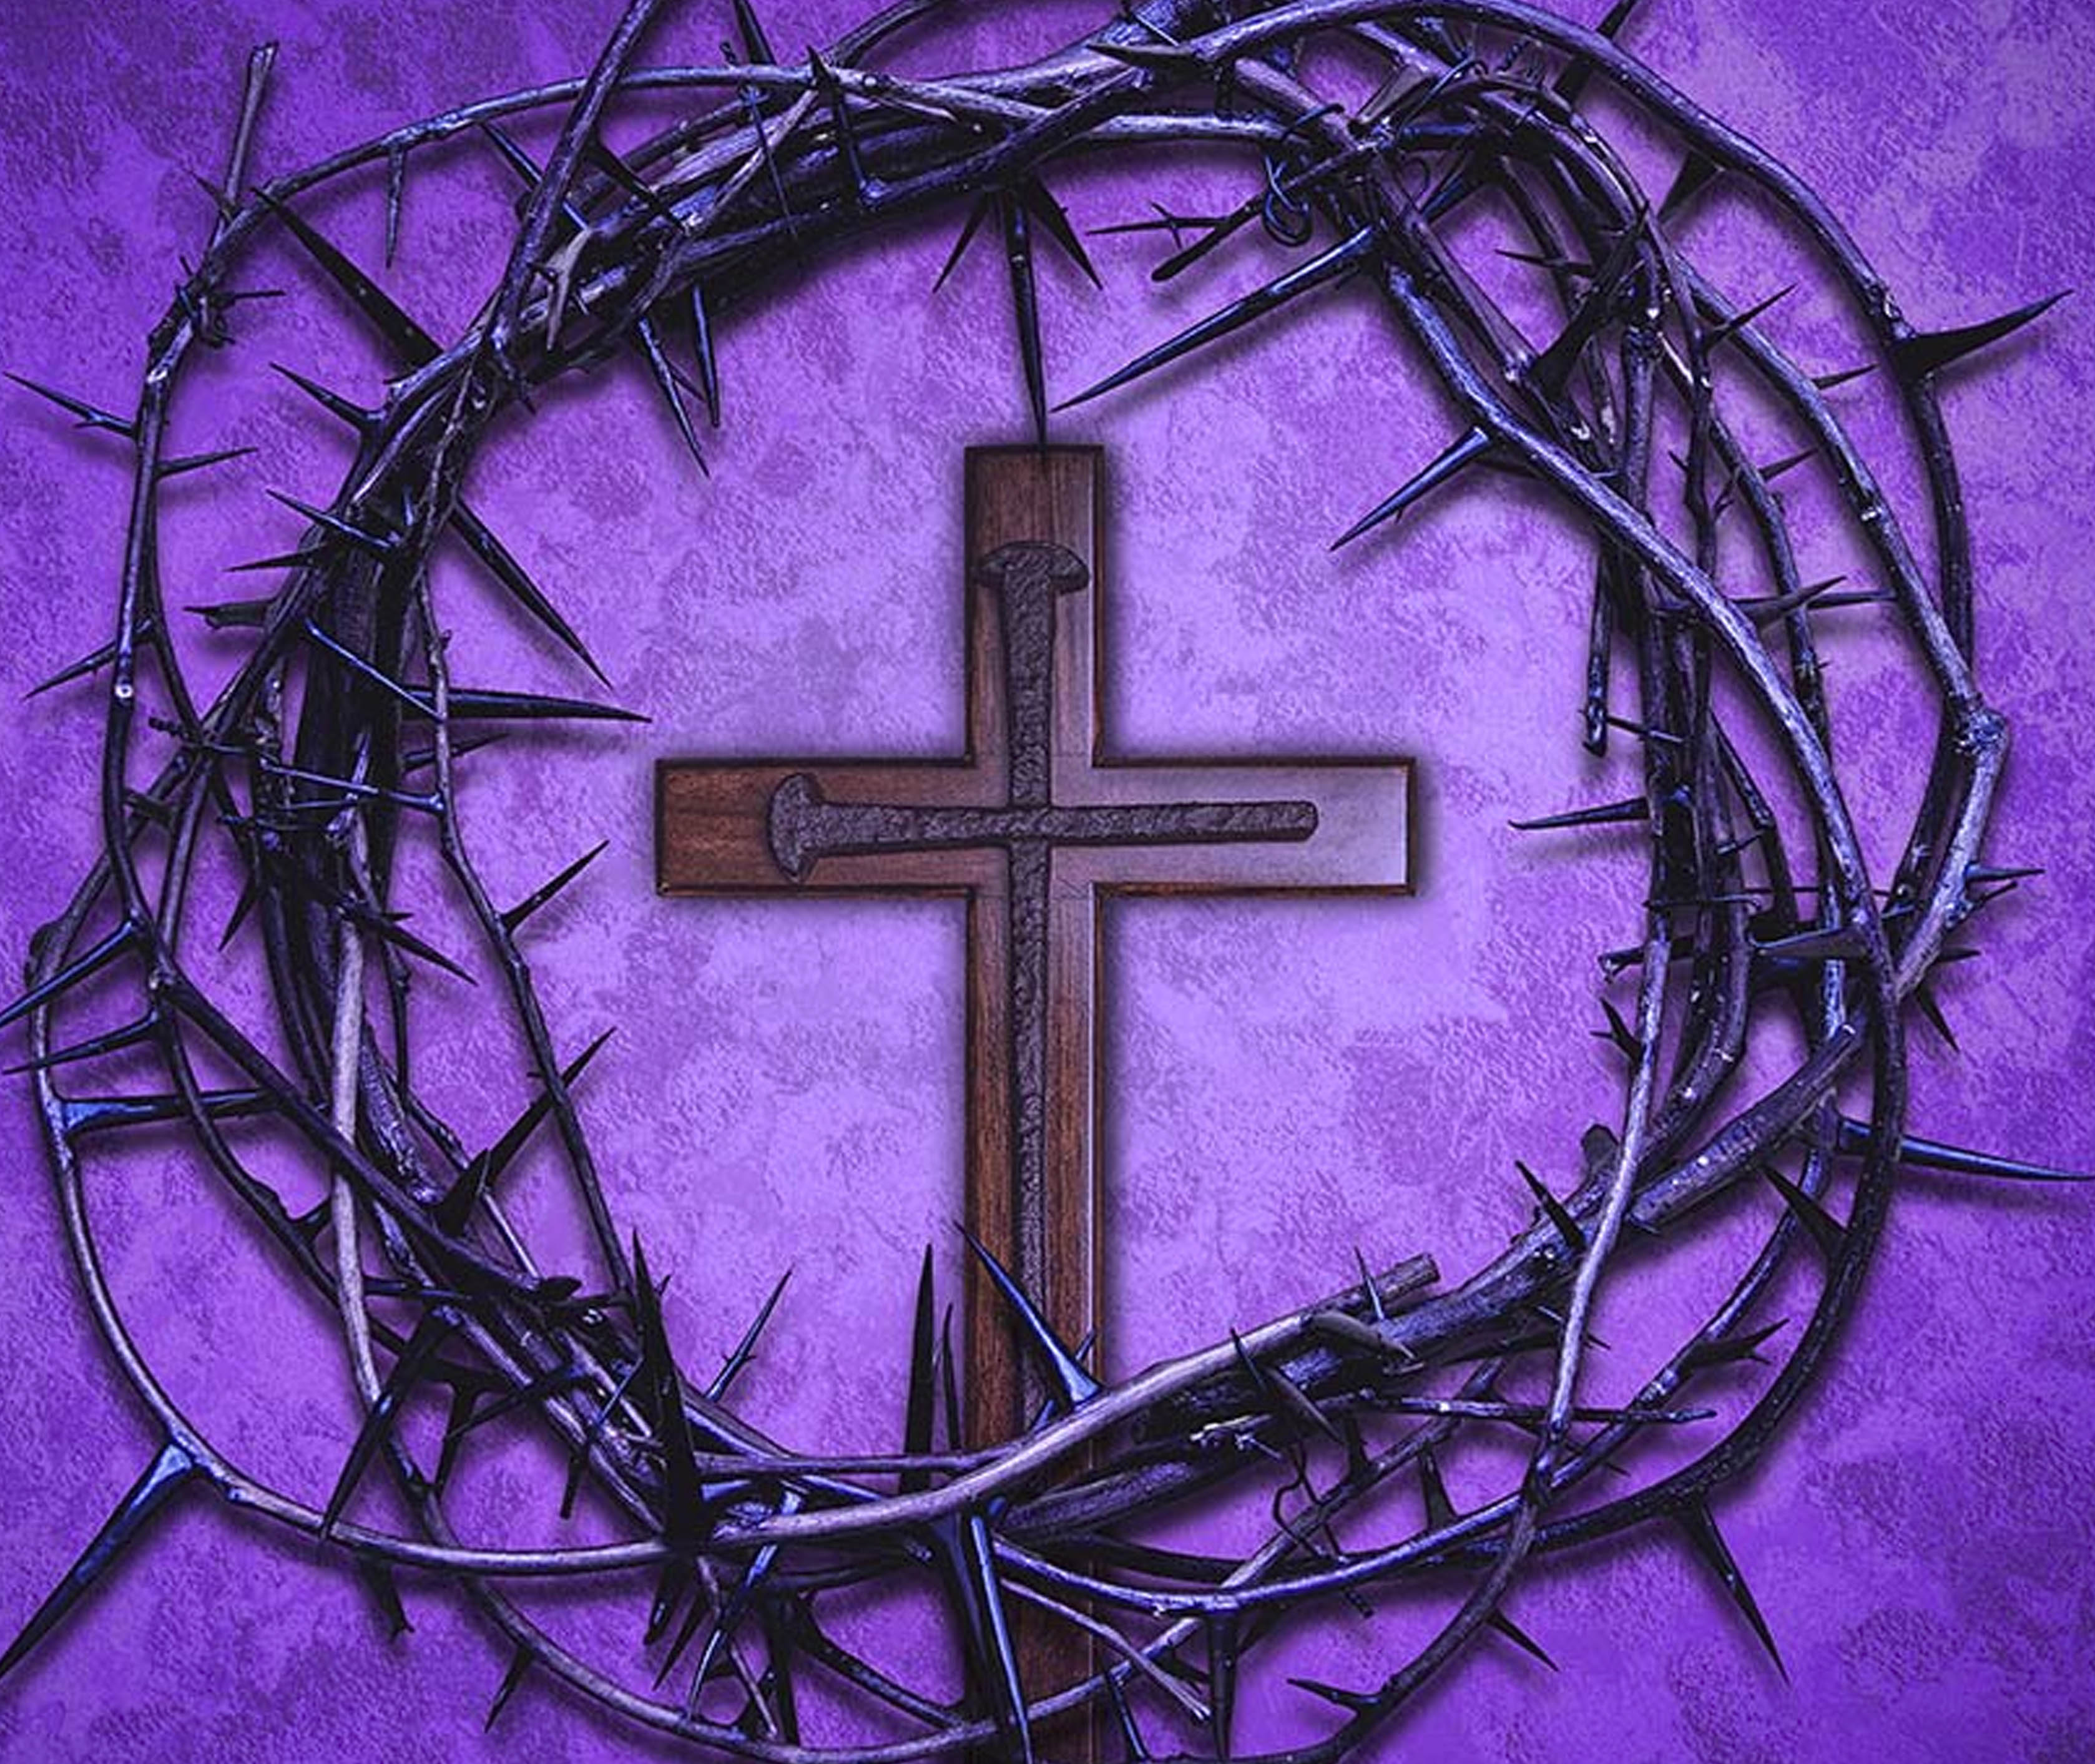 Lent Crown of Thorns with Nails